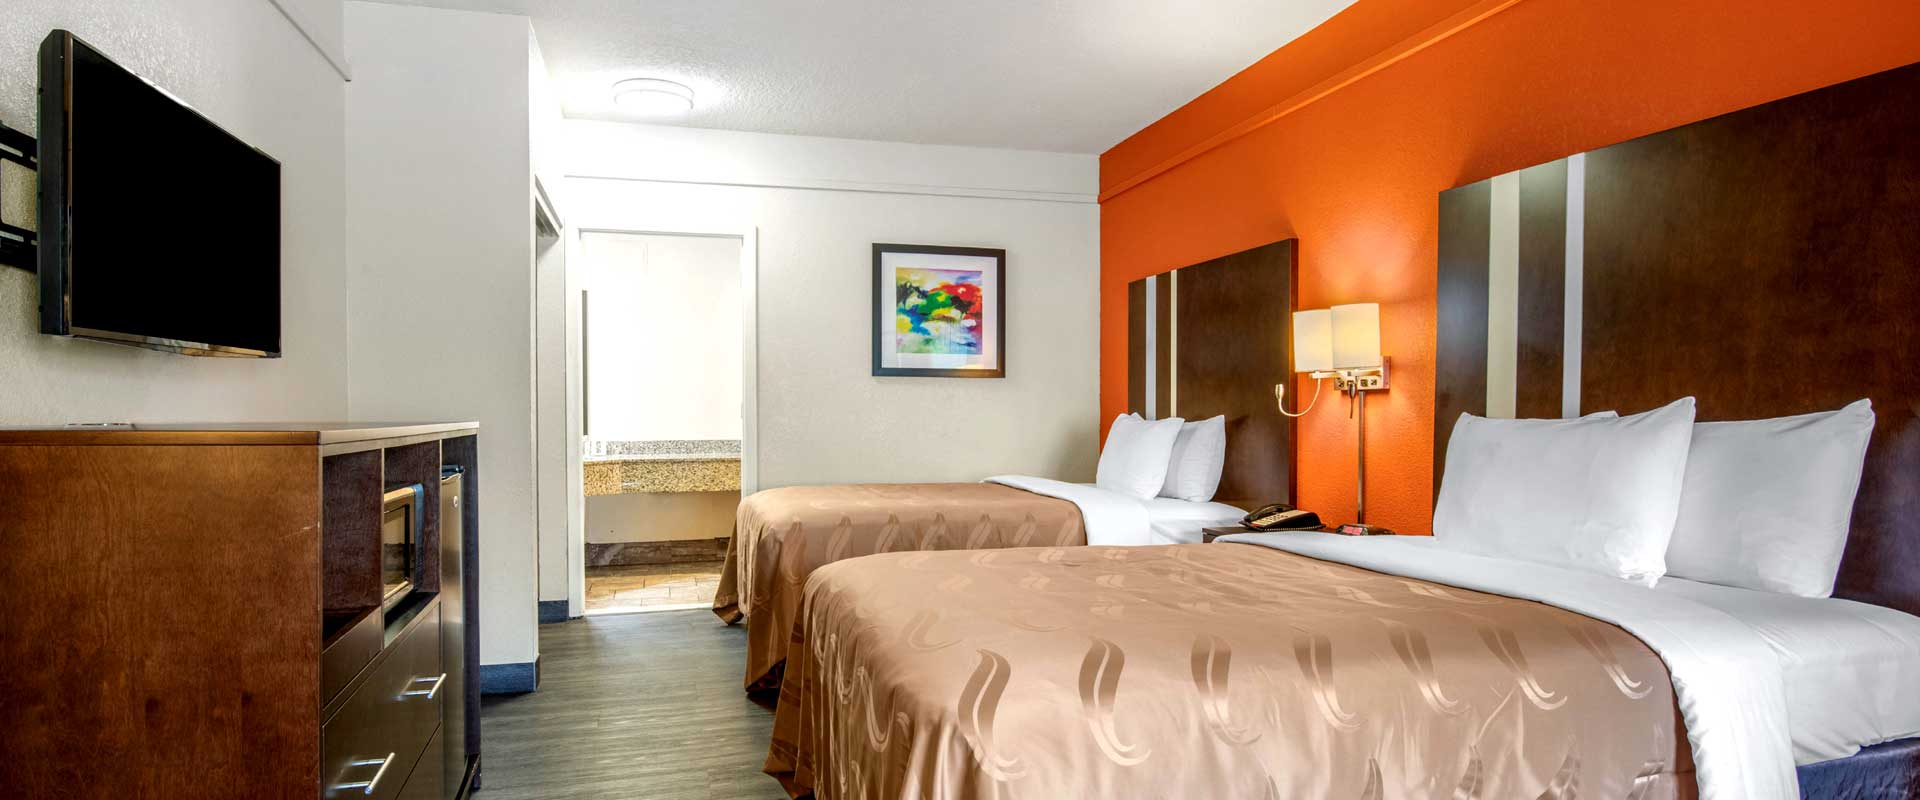 Jacksonville Inn and Suites | Jacksonville 3 Star rating for 2 Star Prices Hotels Motels Lodging